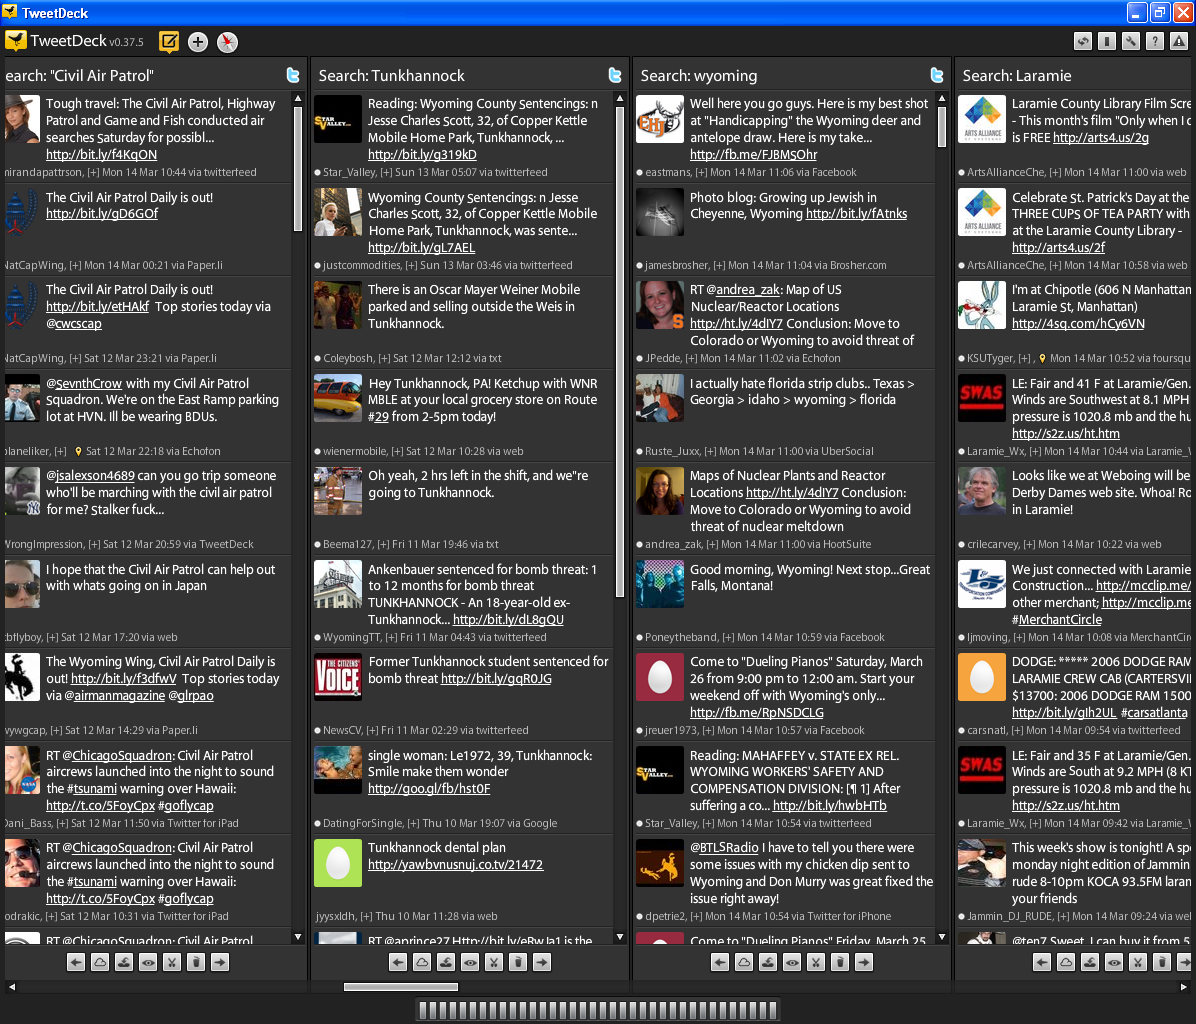 view twitter feed